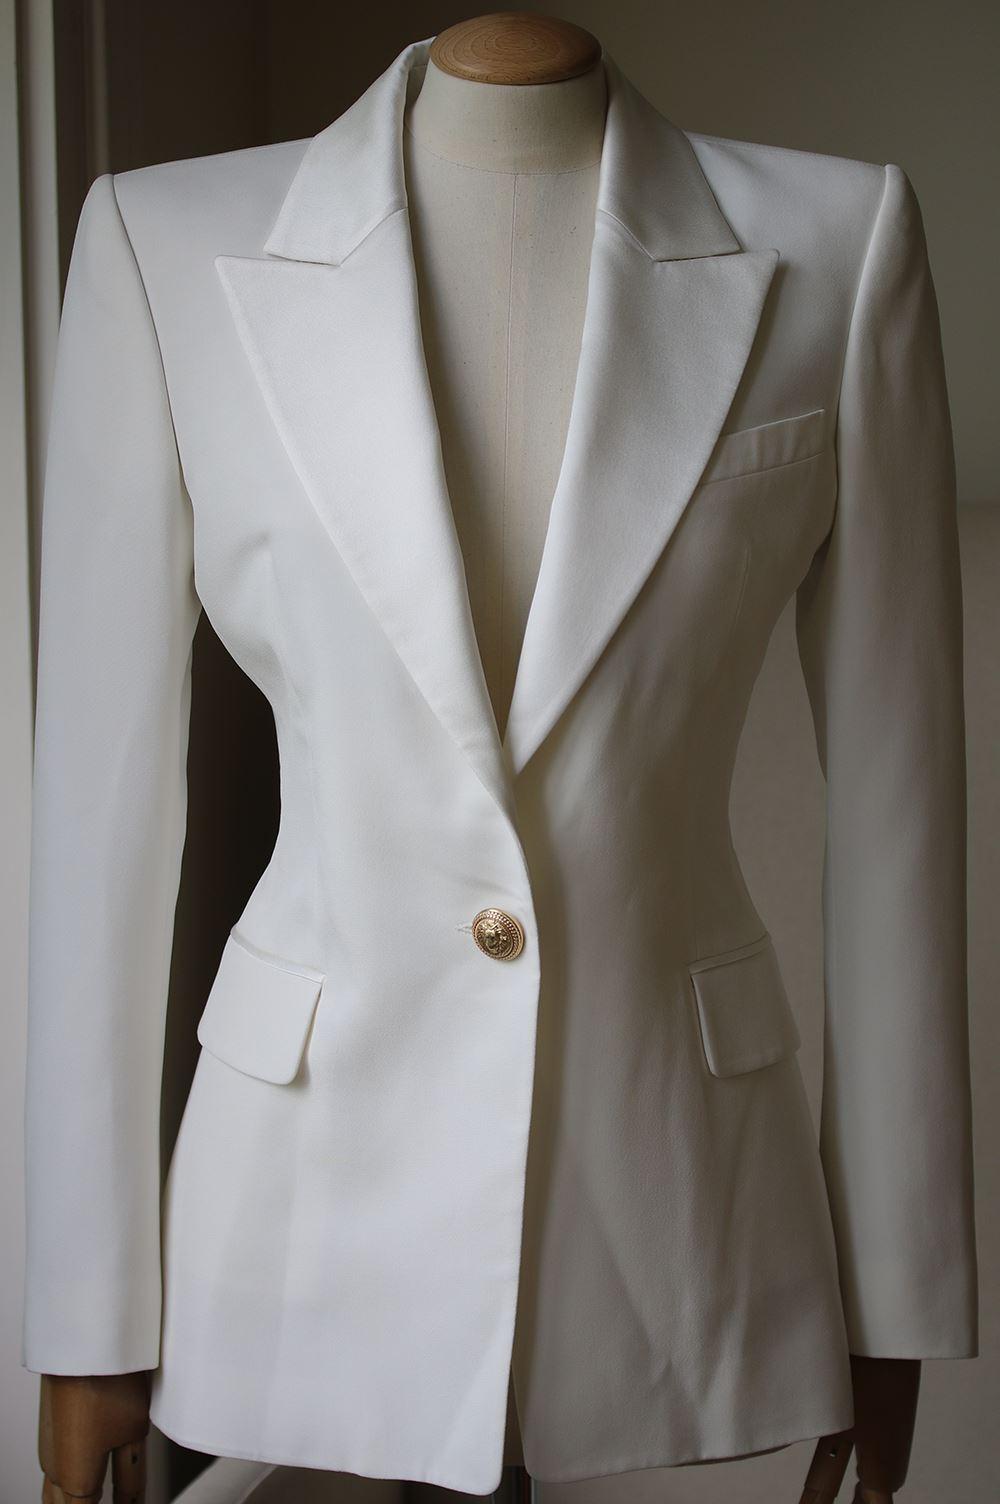 Balmain's Off-White Blazer Has Been Expertly Crafted In France From Crepe. This Tailored Style Has Signature Structured Shoulders And Military-Inspired Gold Buttons - The One At The Waist Is Positioned For The Most Flattering Cinching Effect.